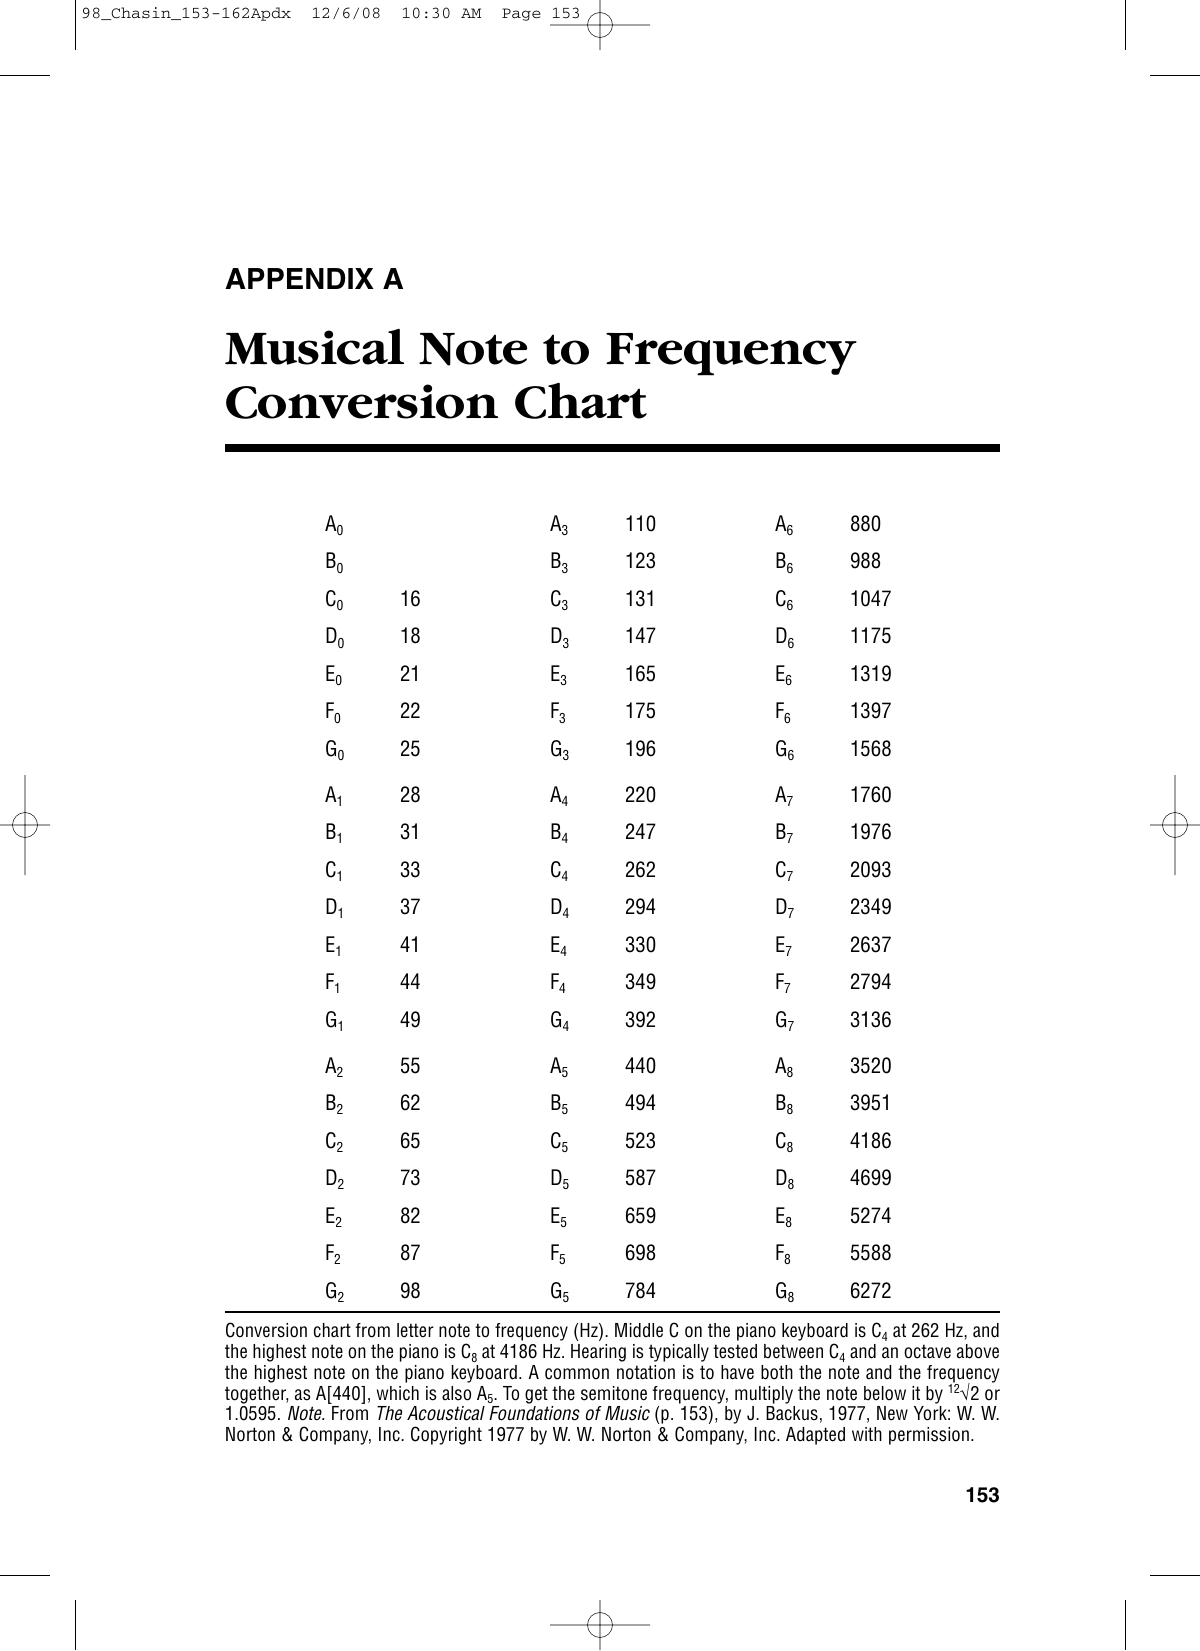 musical-note-to-frequency-conversion-chart